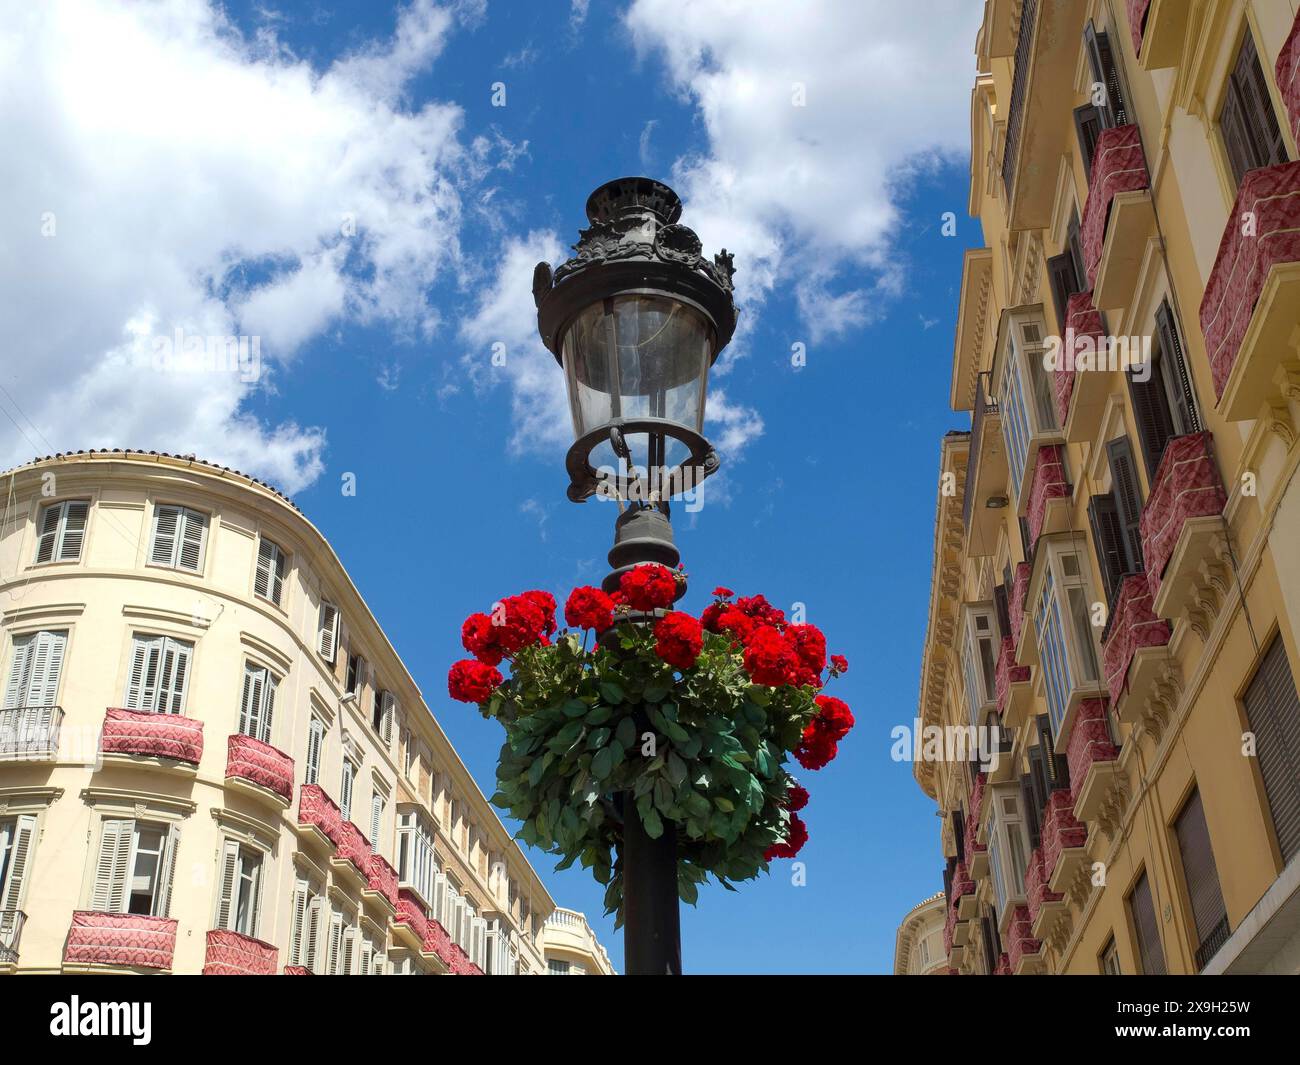 Wrought iron street lamp with red flowers against a clear blue sky and surrounding buildings, the historic fortress of Malaga on the Mediterranean Stock Photo